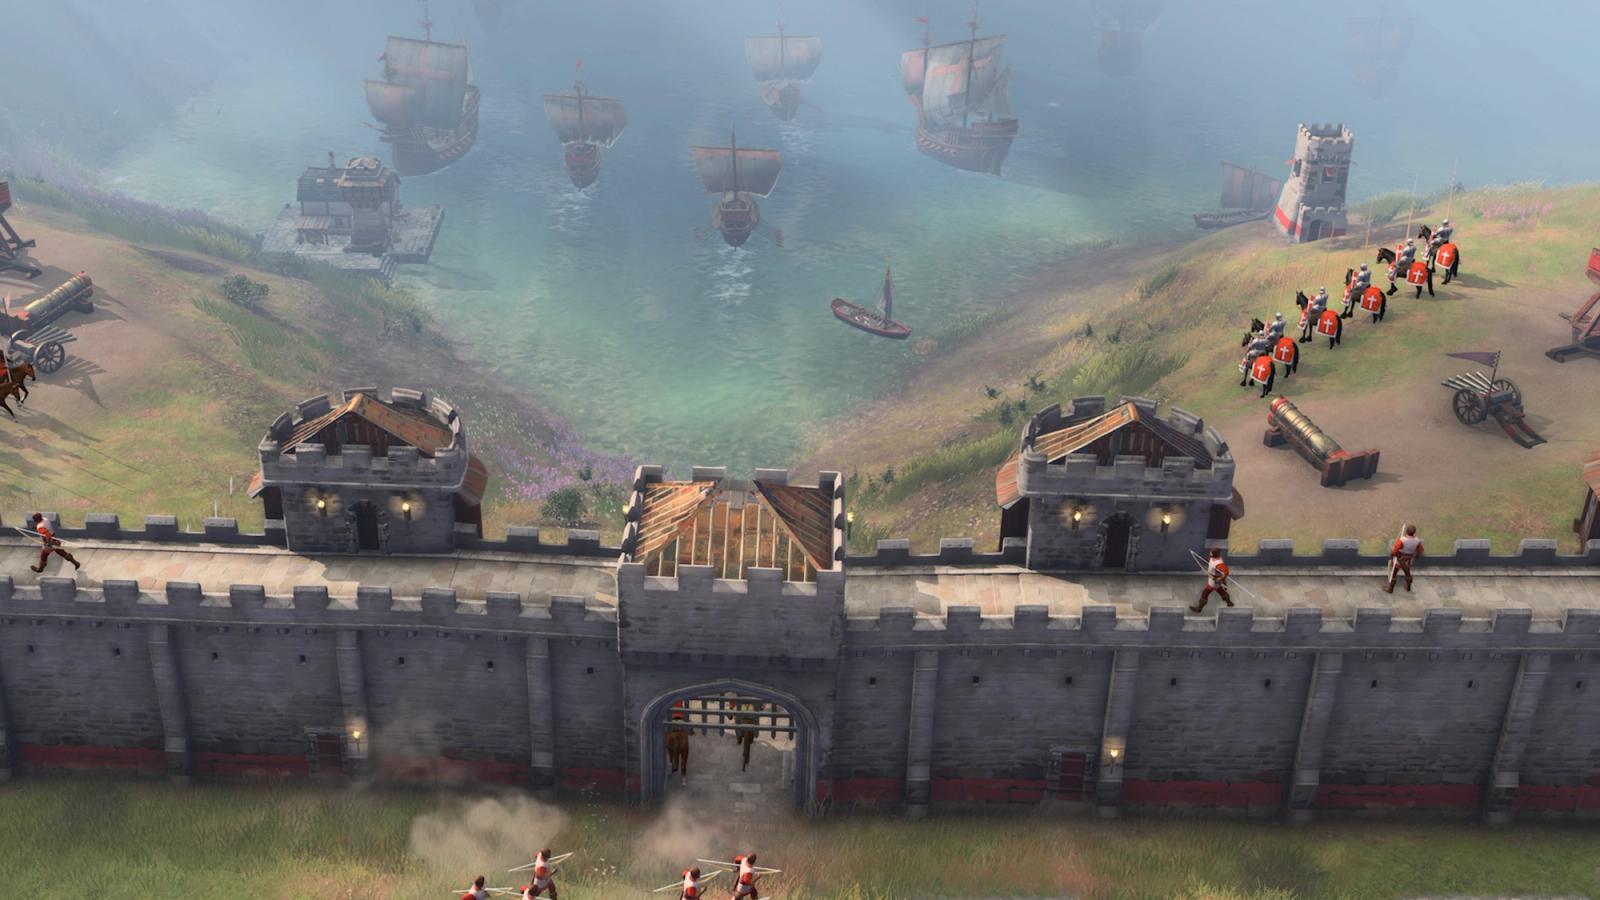 An Age of Empires 4 town surrounded by highly defensible Stone Walls, Gates and Towers with infantry available.